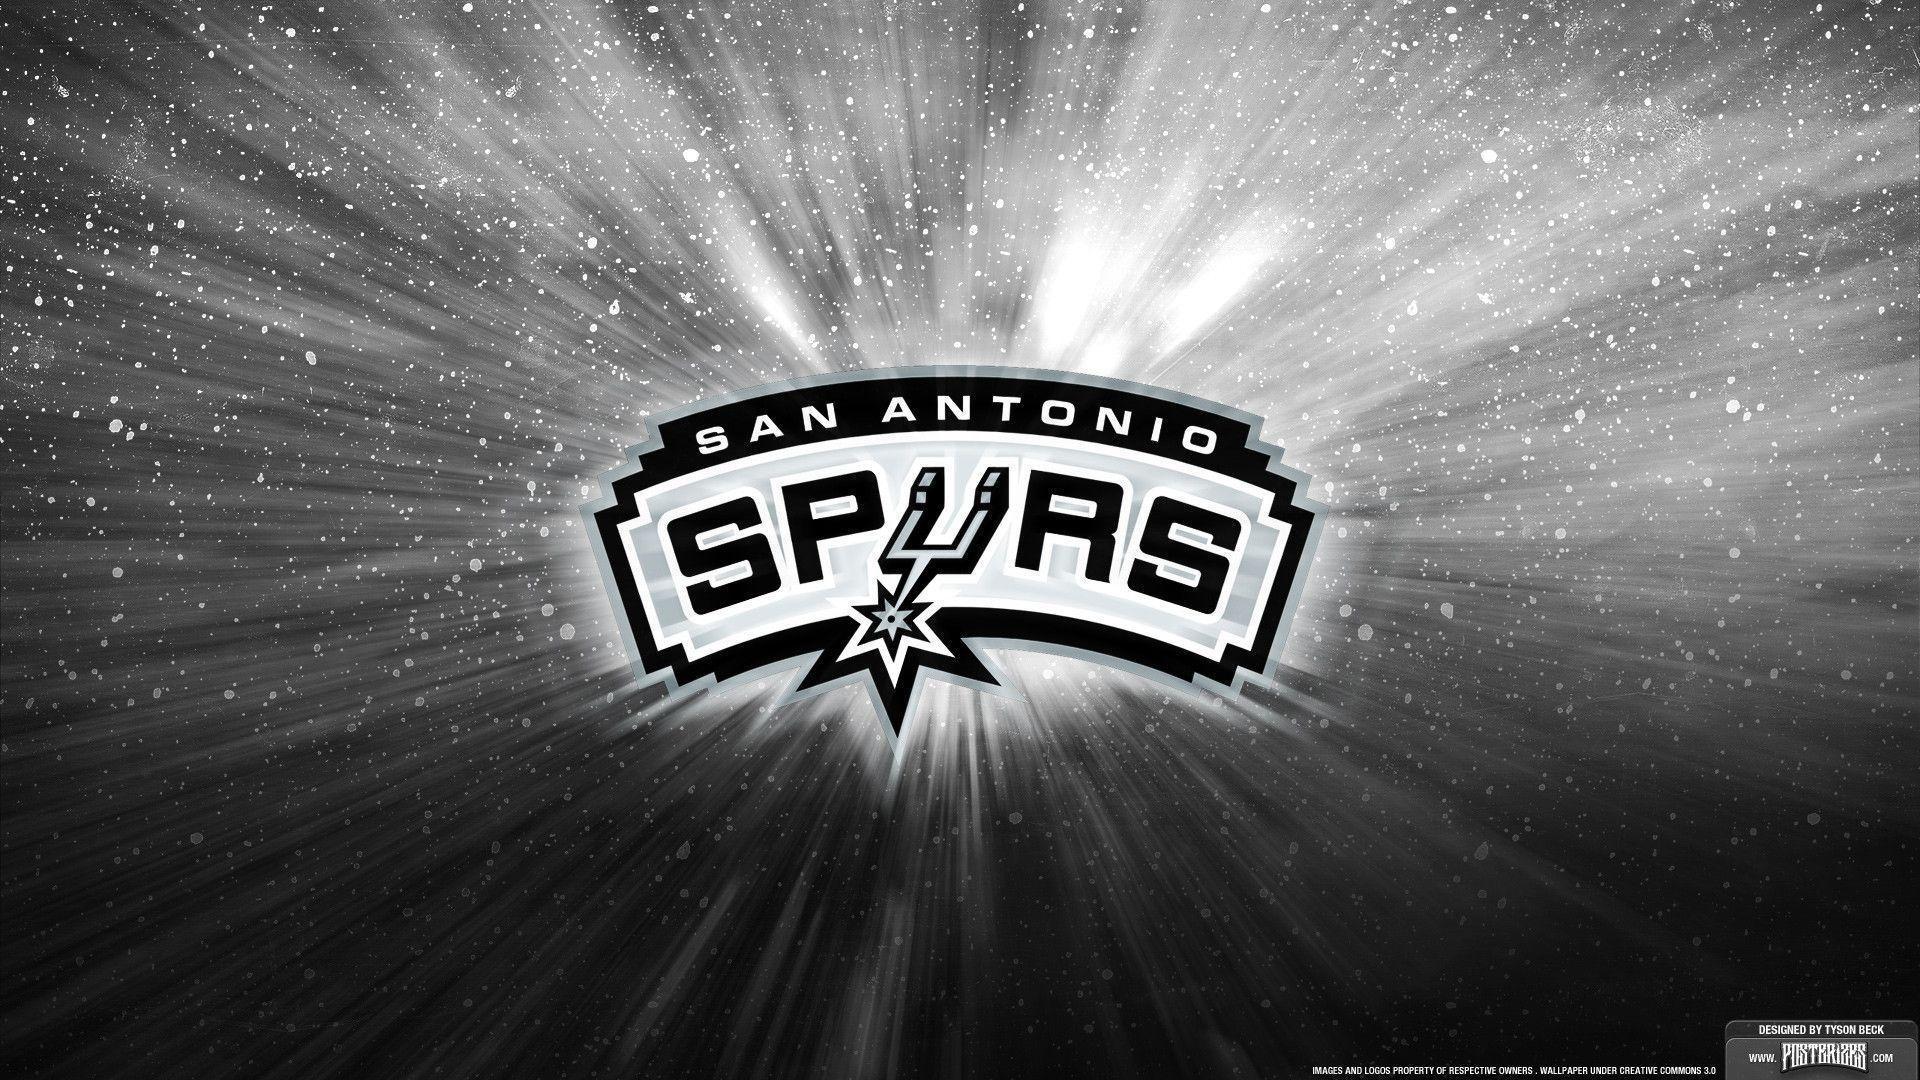 Free Spurs Wallpapers - Wallpaper Cave